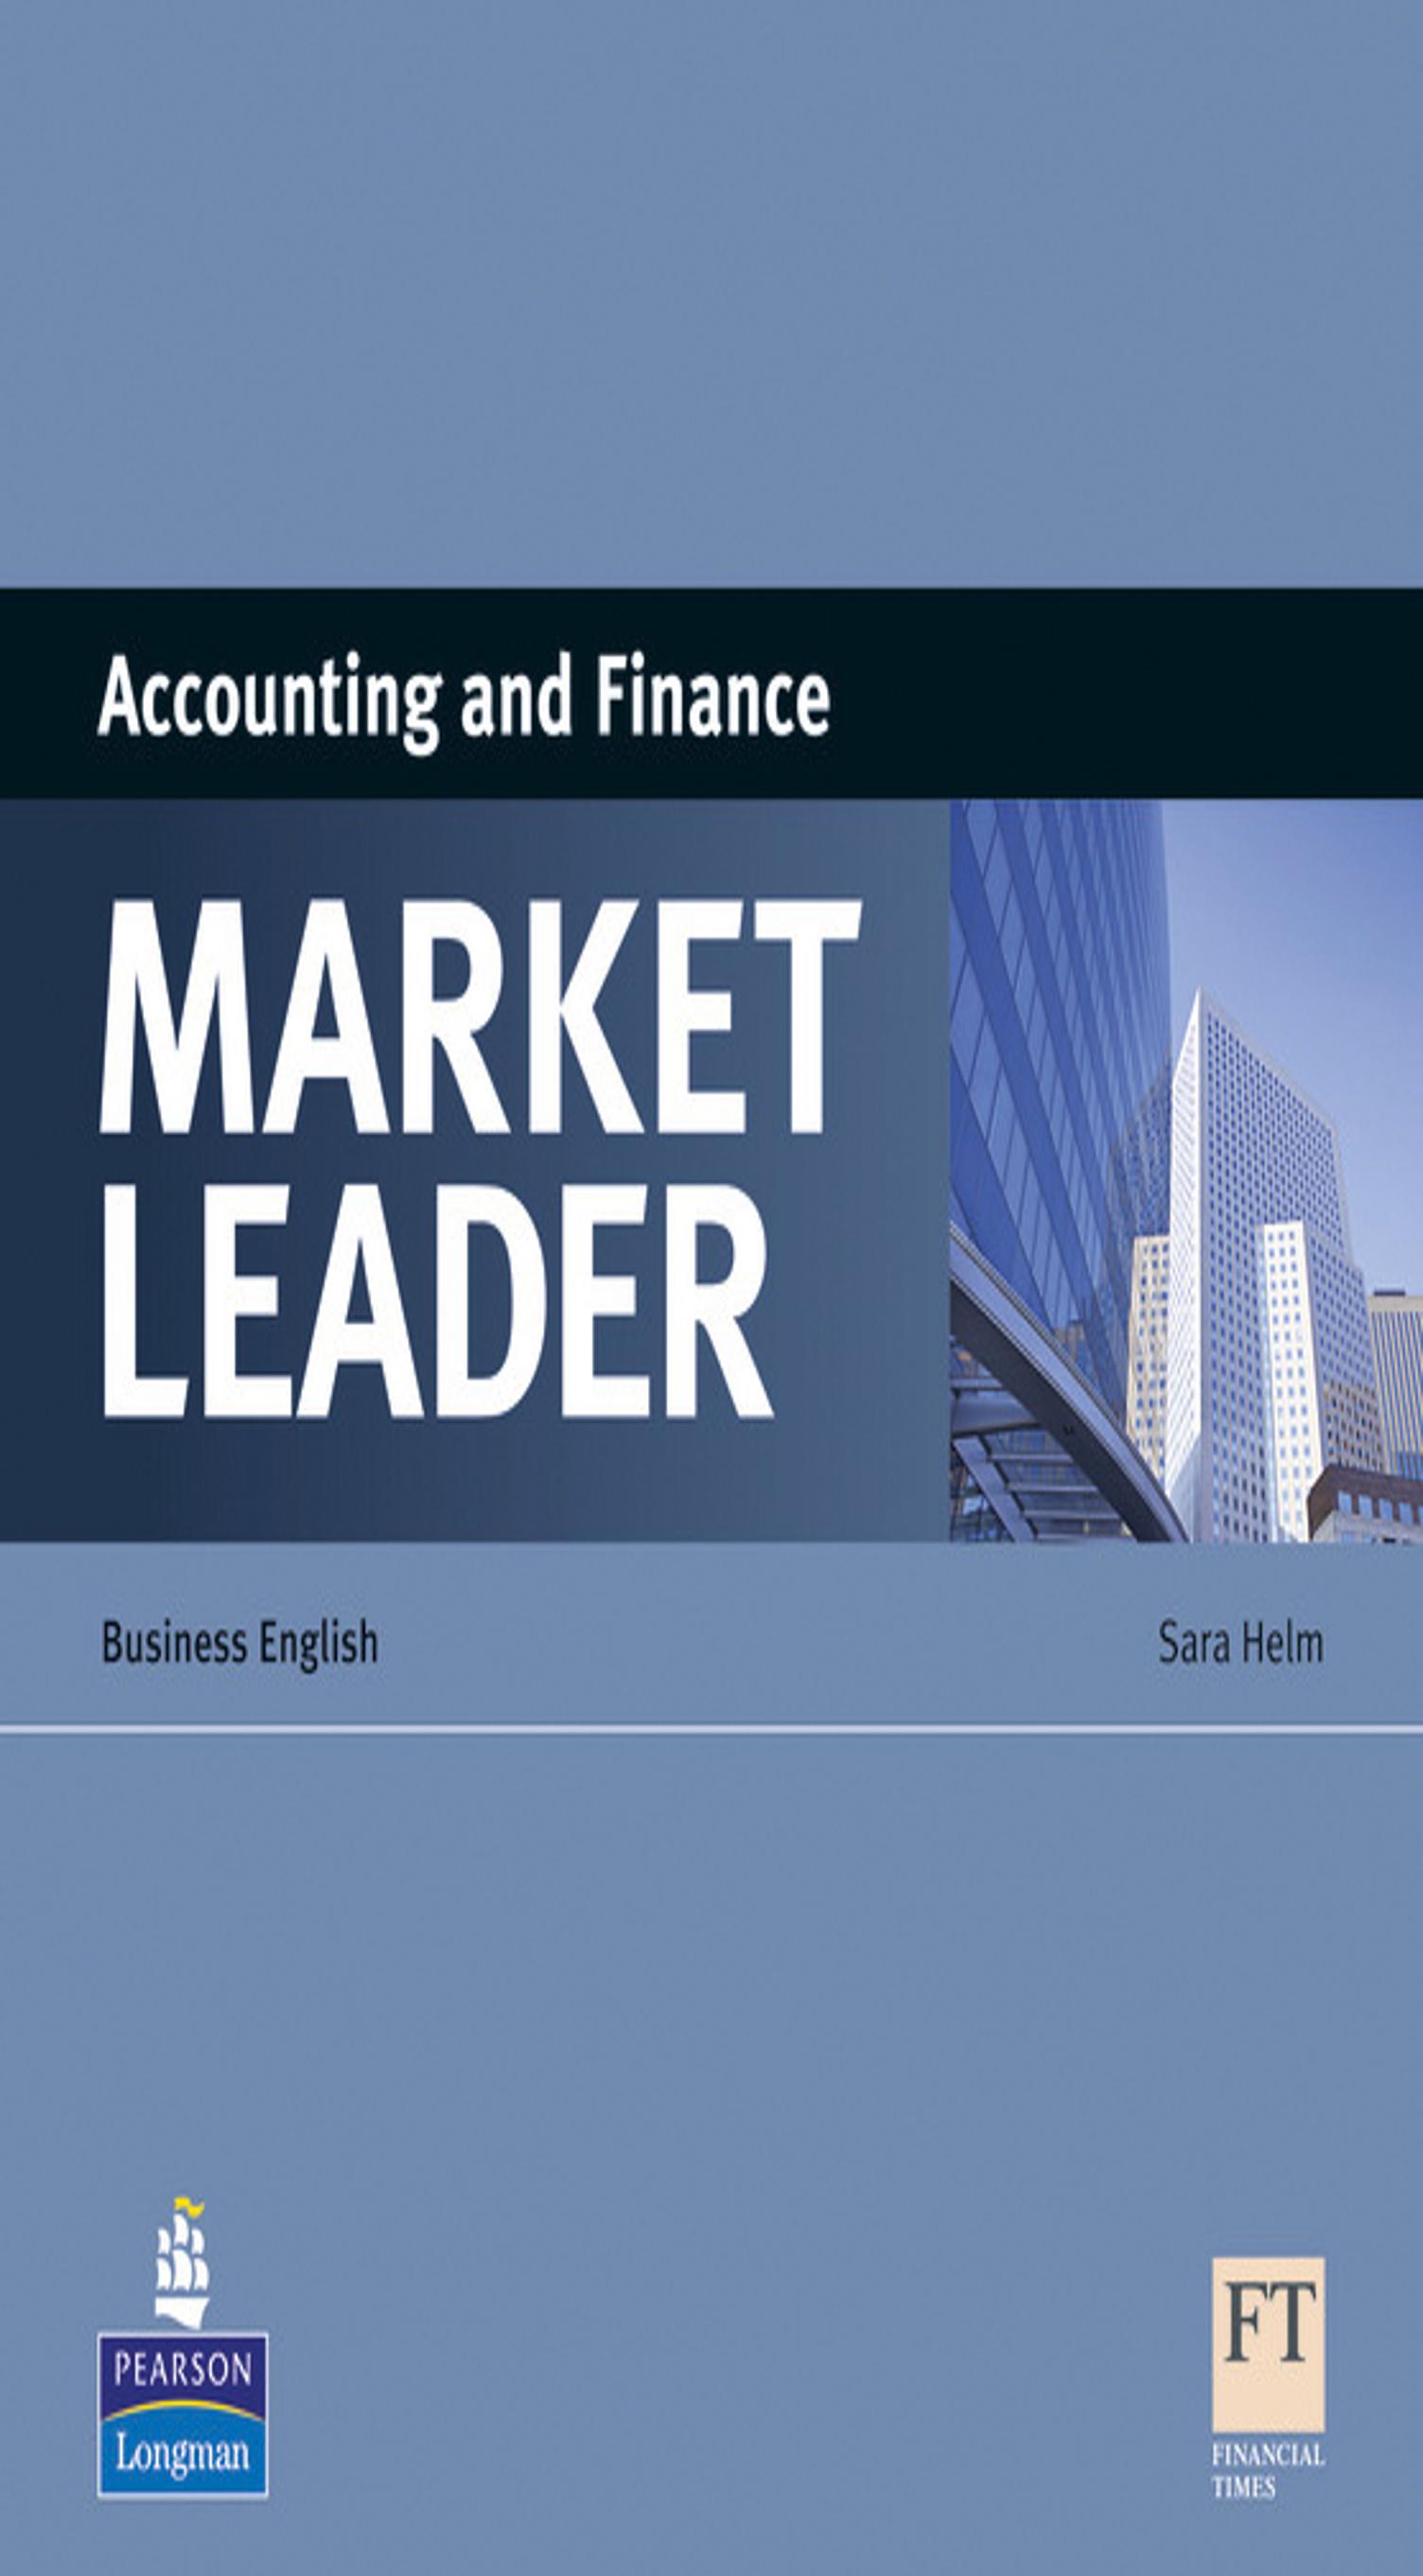 MARKET LEADER ACCOUNTING & FINANCE